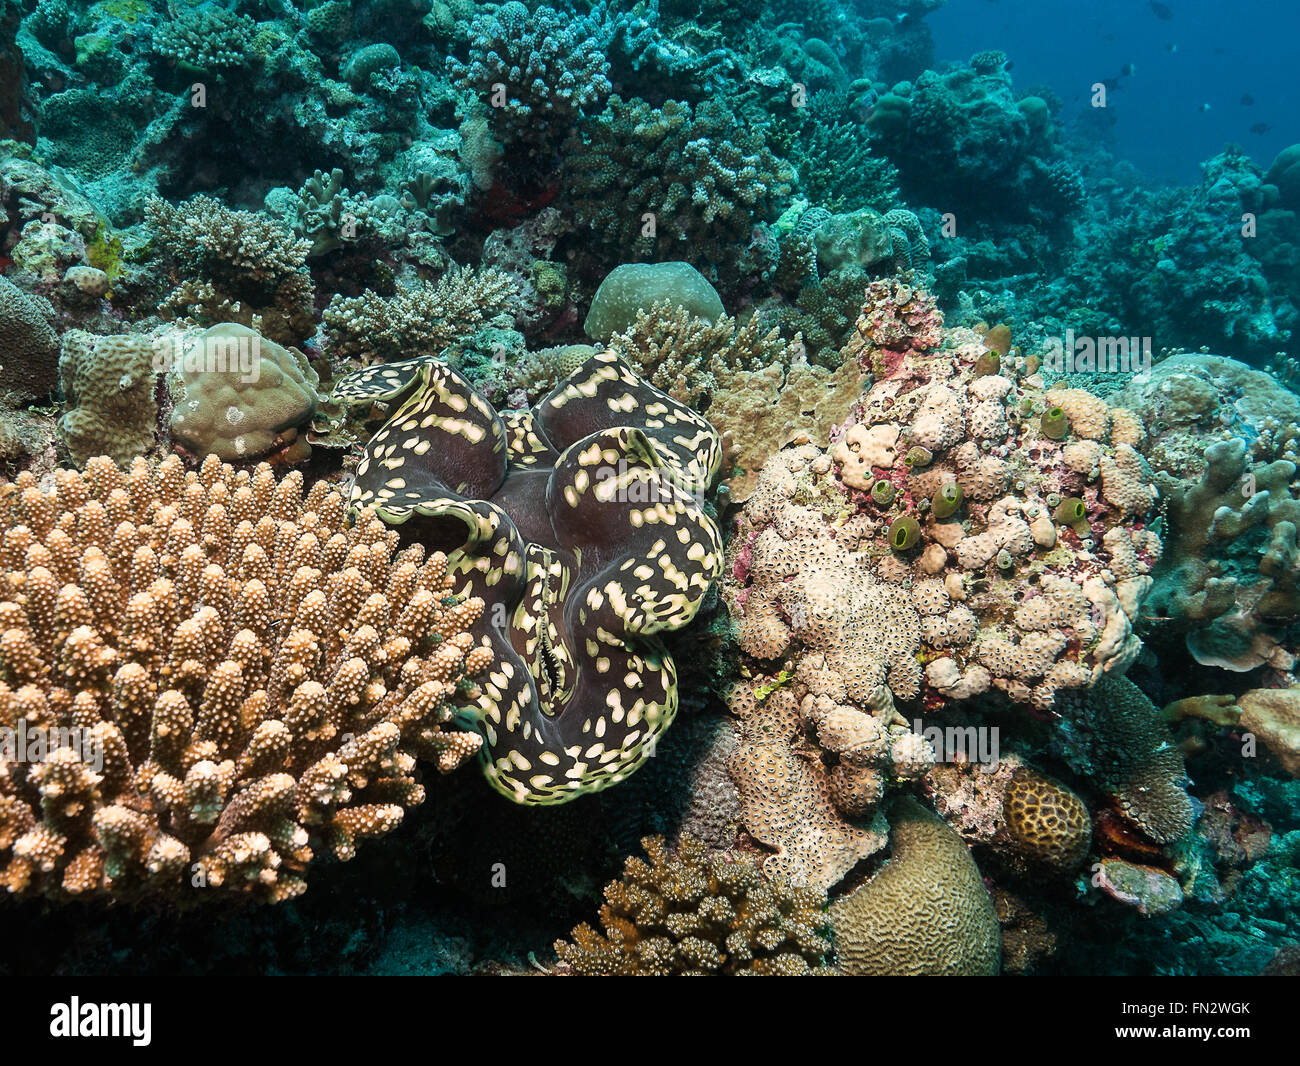 A giant clam, it's shell closed only its mottled yellow and brown mantle exposed wedged between two hard coral mounds one spiked the other knobbly Stock Photo